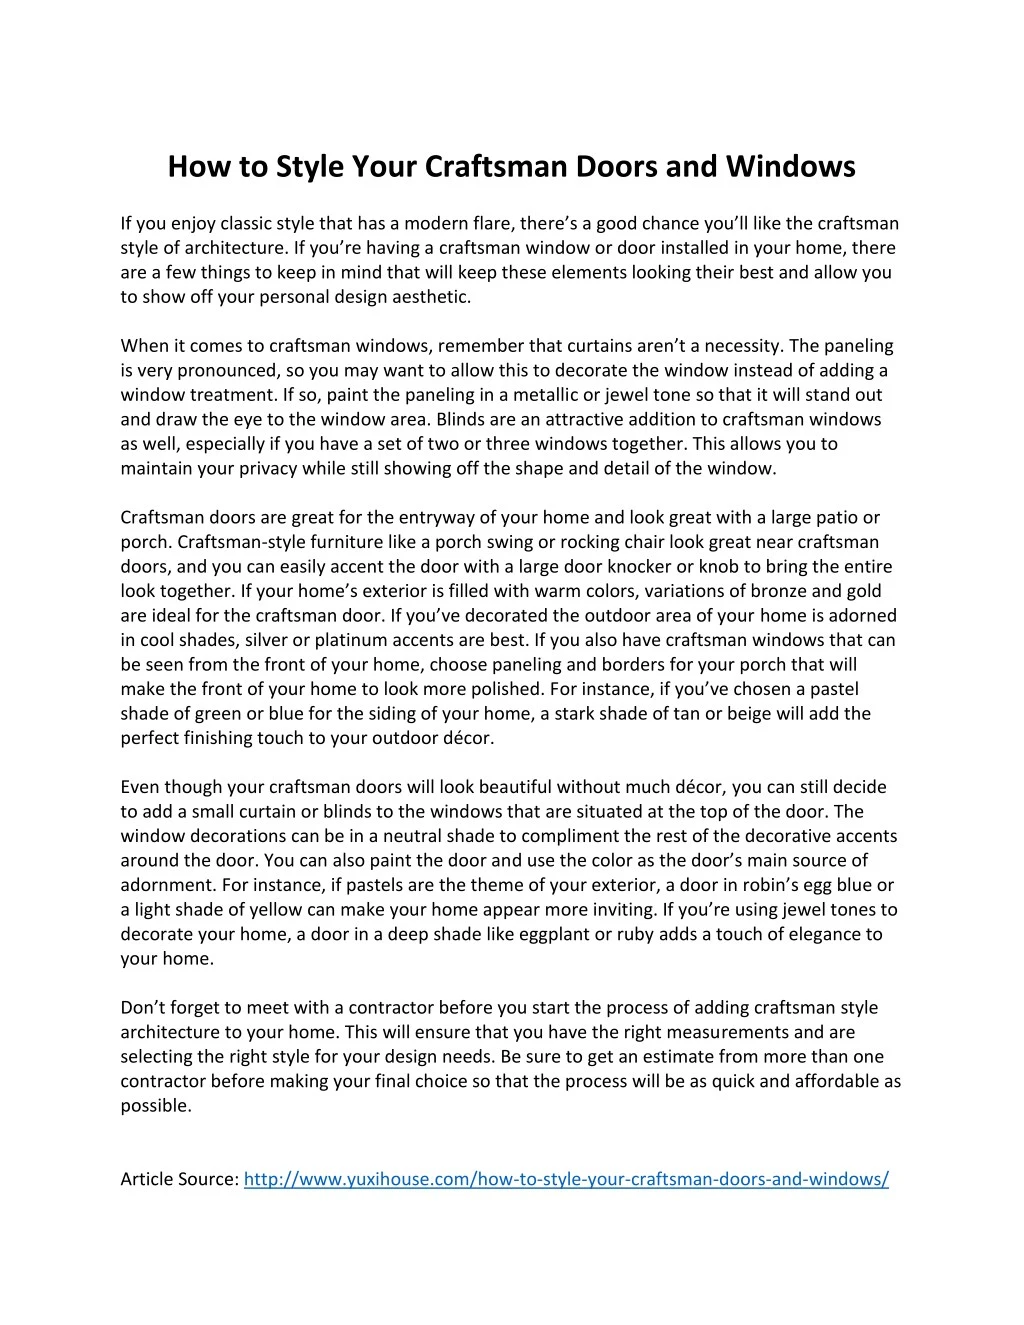 how to style your craftsman doors and windows